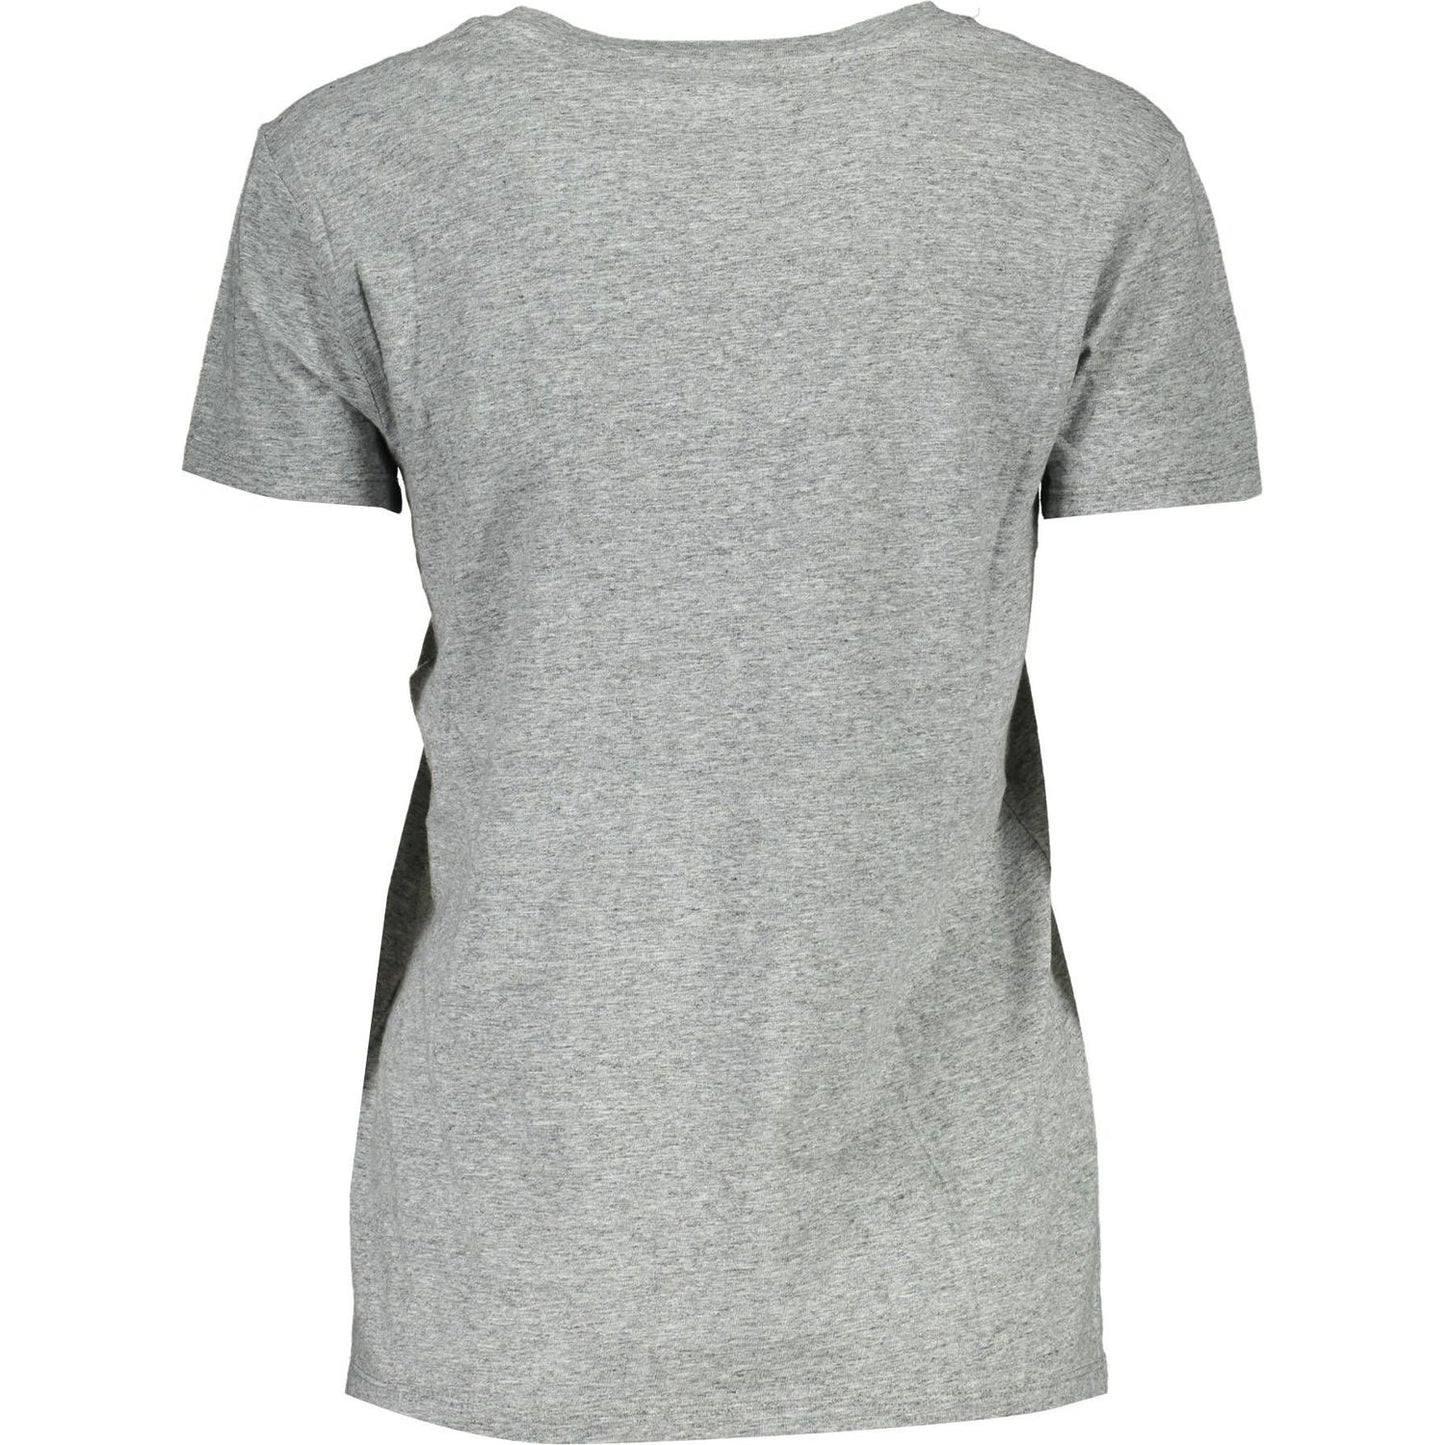 Levi's Chic Gray Printed Logo Cotton Tee for Women chic-gray-printed-logo-cotton-tee-for-women